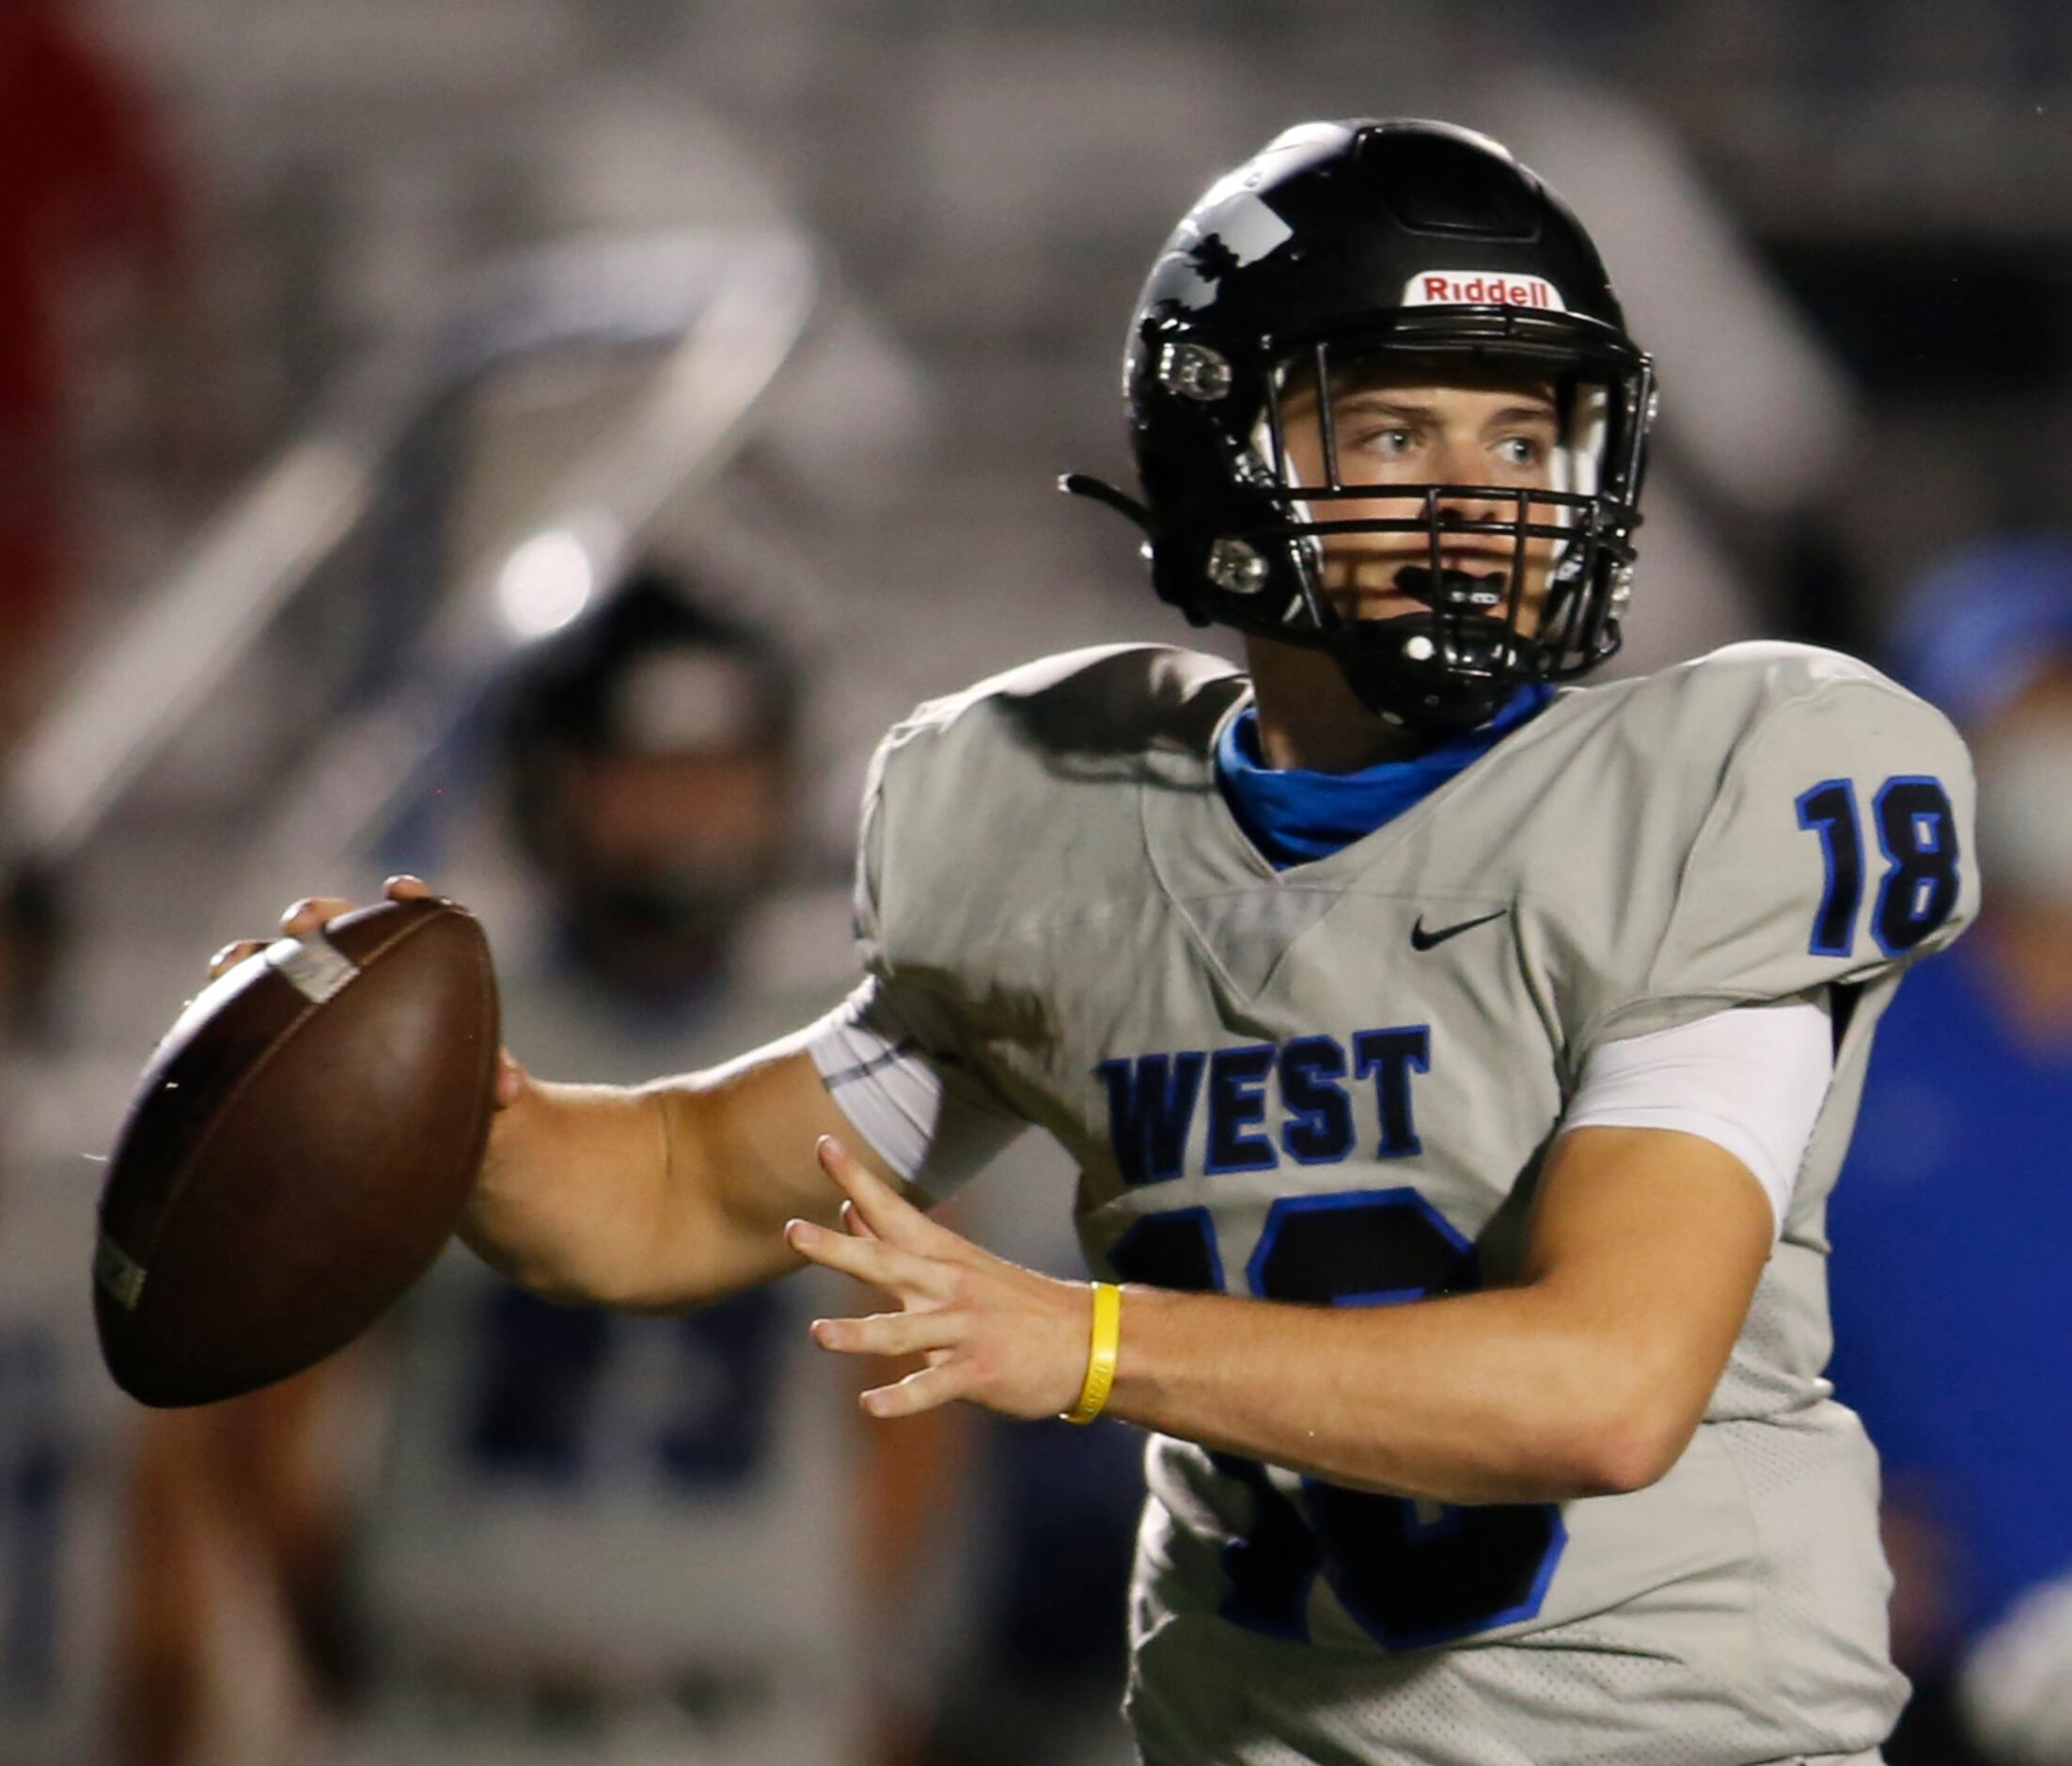 Plano West quarterback Greg Draughn (18) stands strong in the pocket as he prepares to...